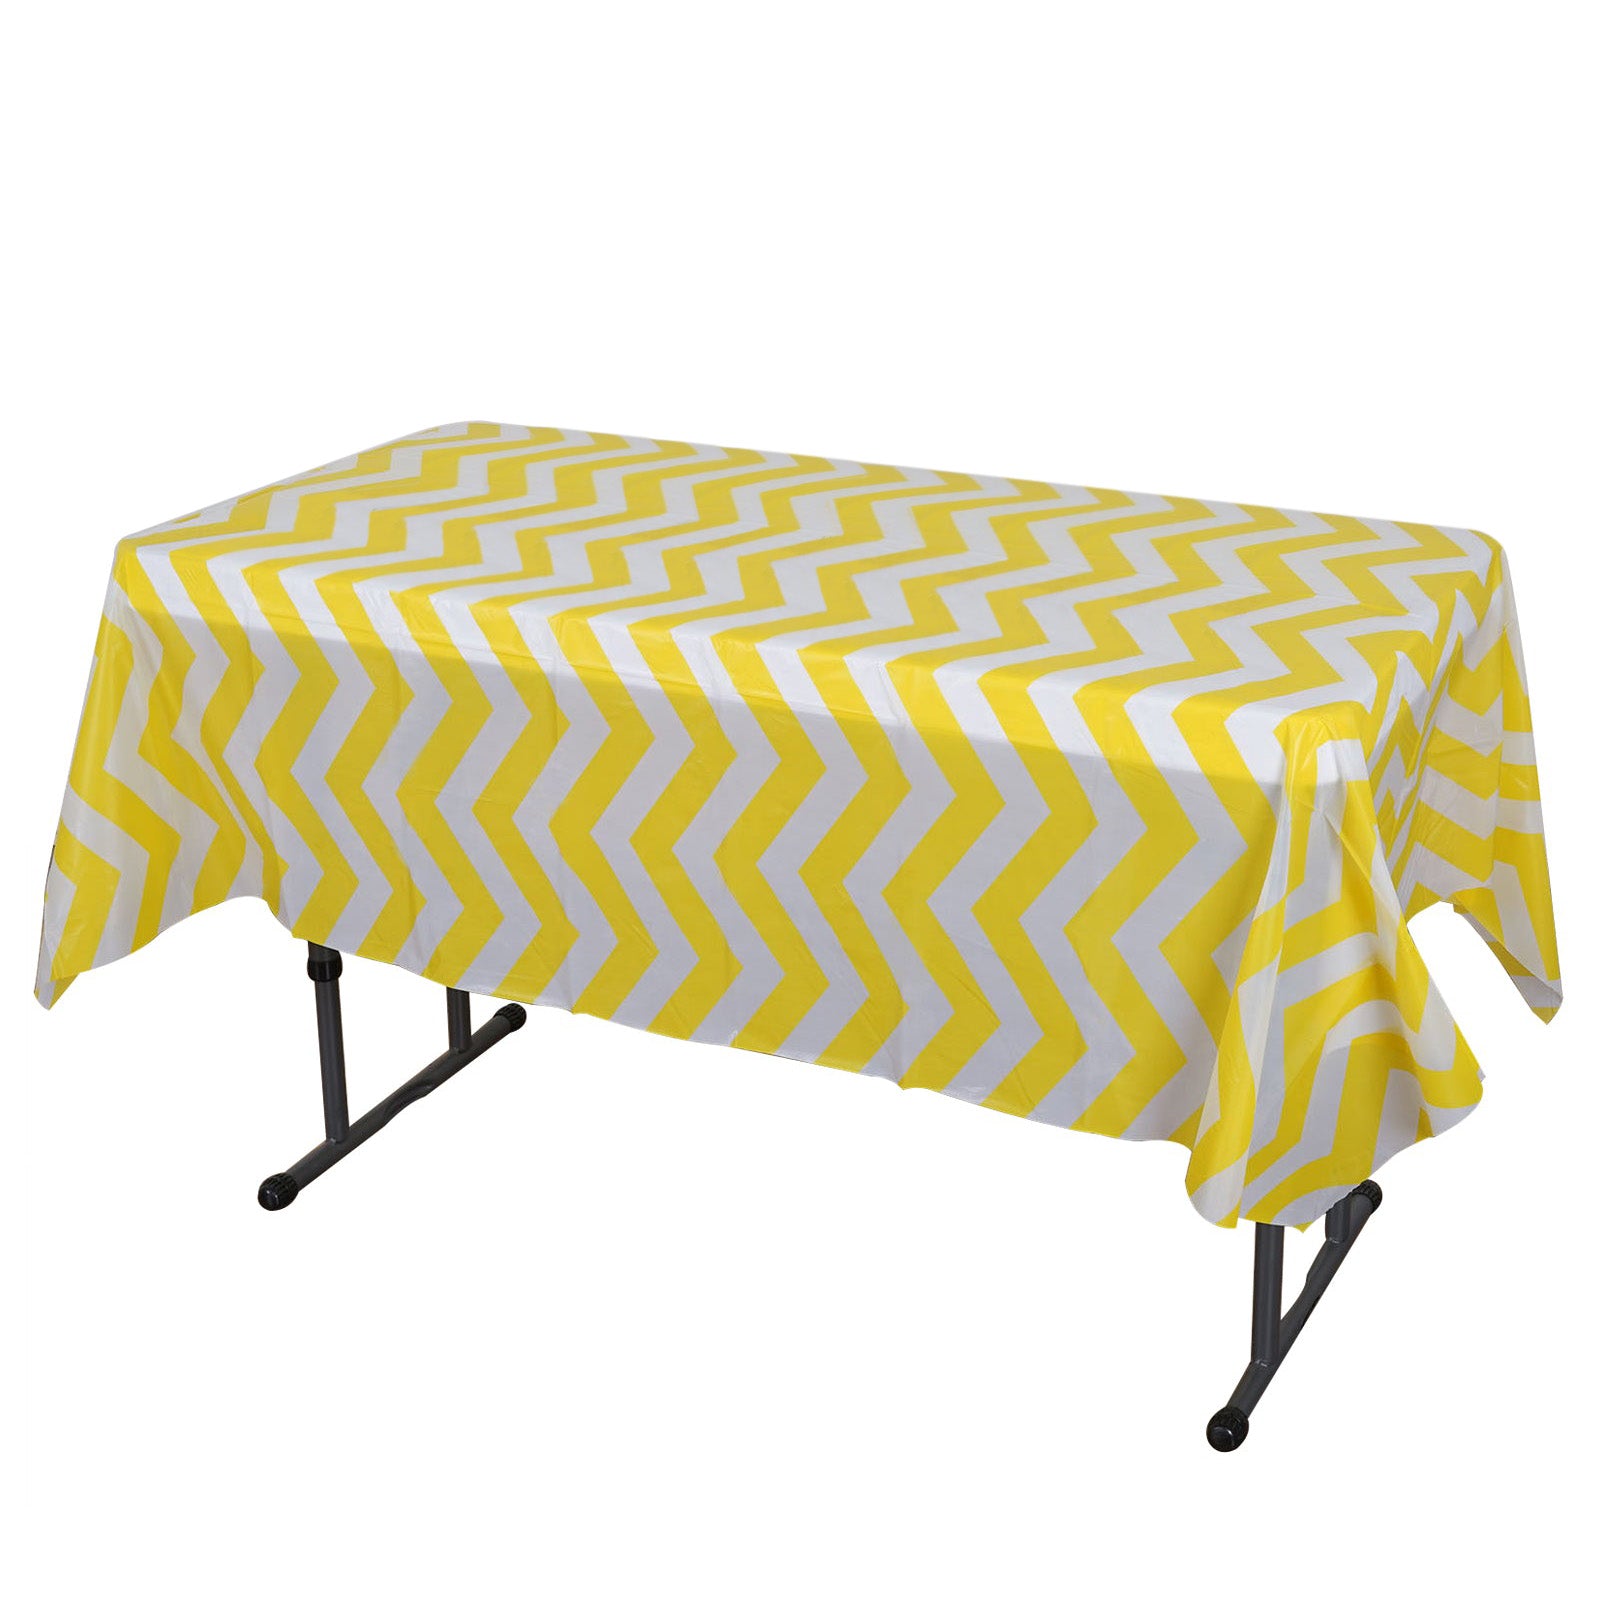 make-your-order-official-of-yellow-chevron-waterproof-plastic-tablecloth-pvc-rectangle-disposable-table-cover-54×72-online_5.jpg